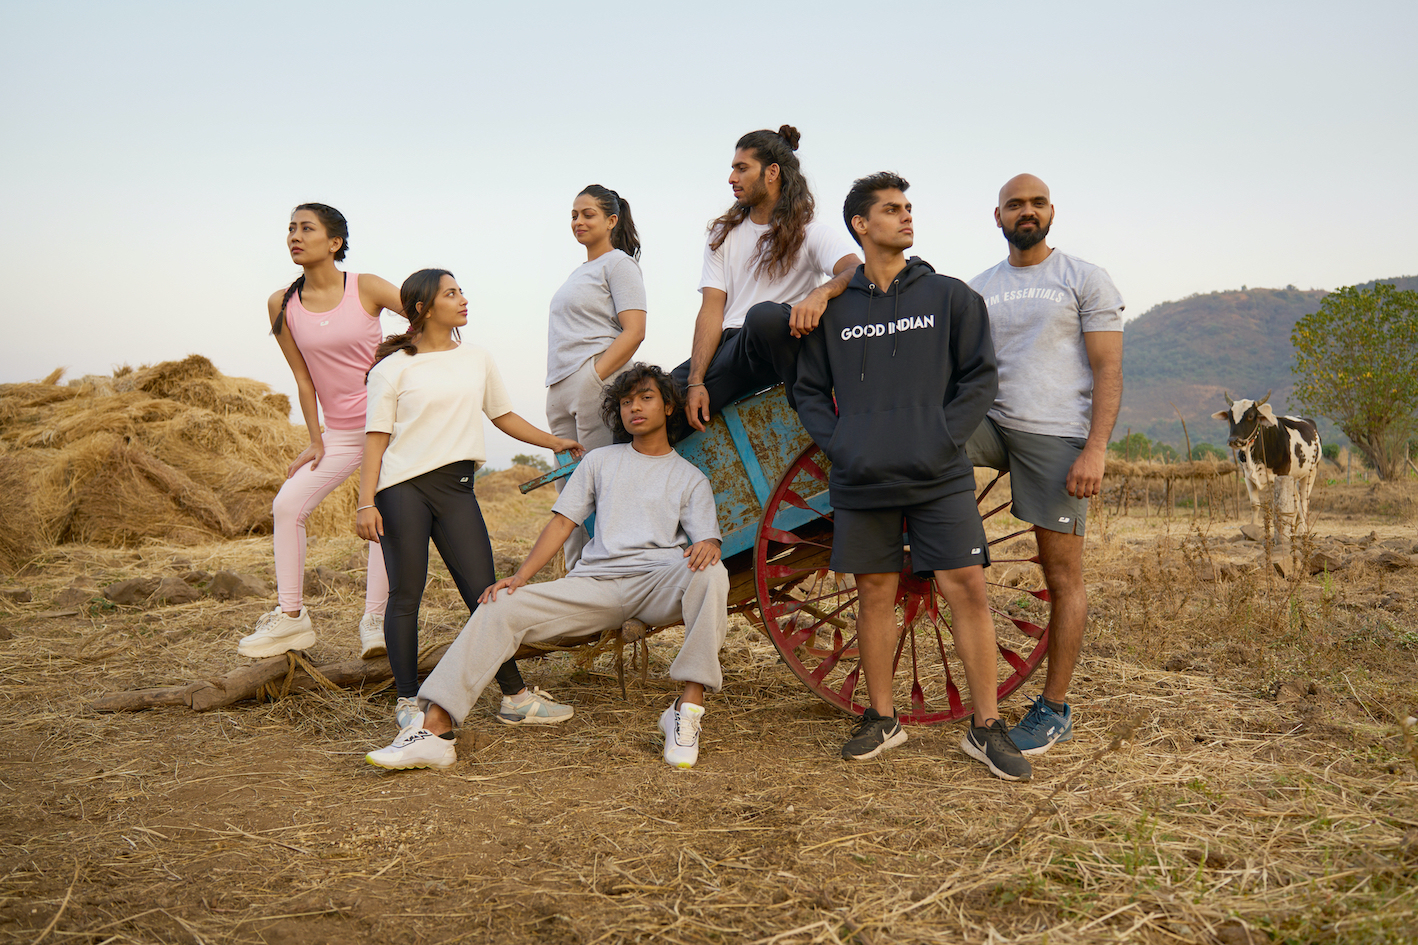 Take a Step Forward With Good Indian, an Activewear Brand That Inspires to Push The Good in You